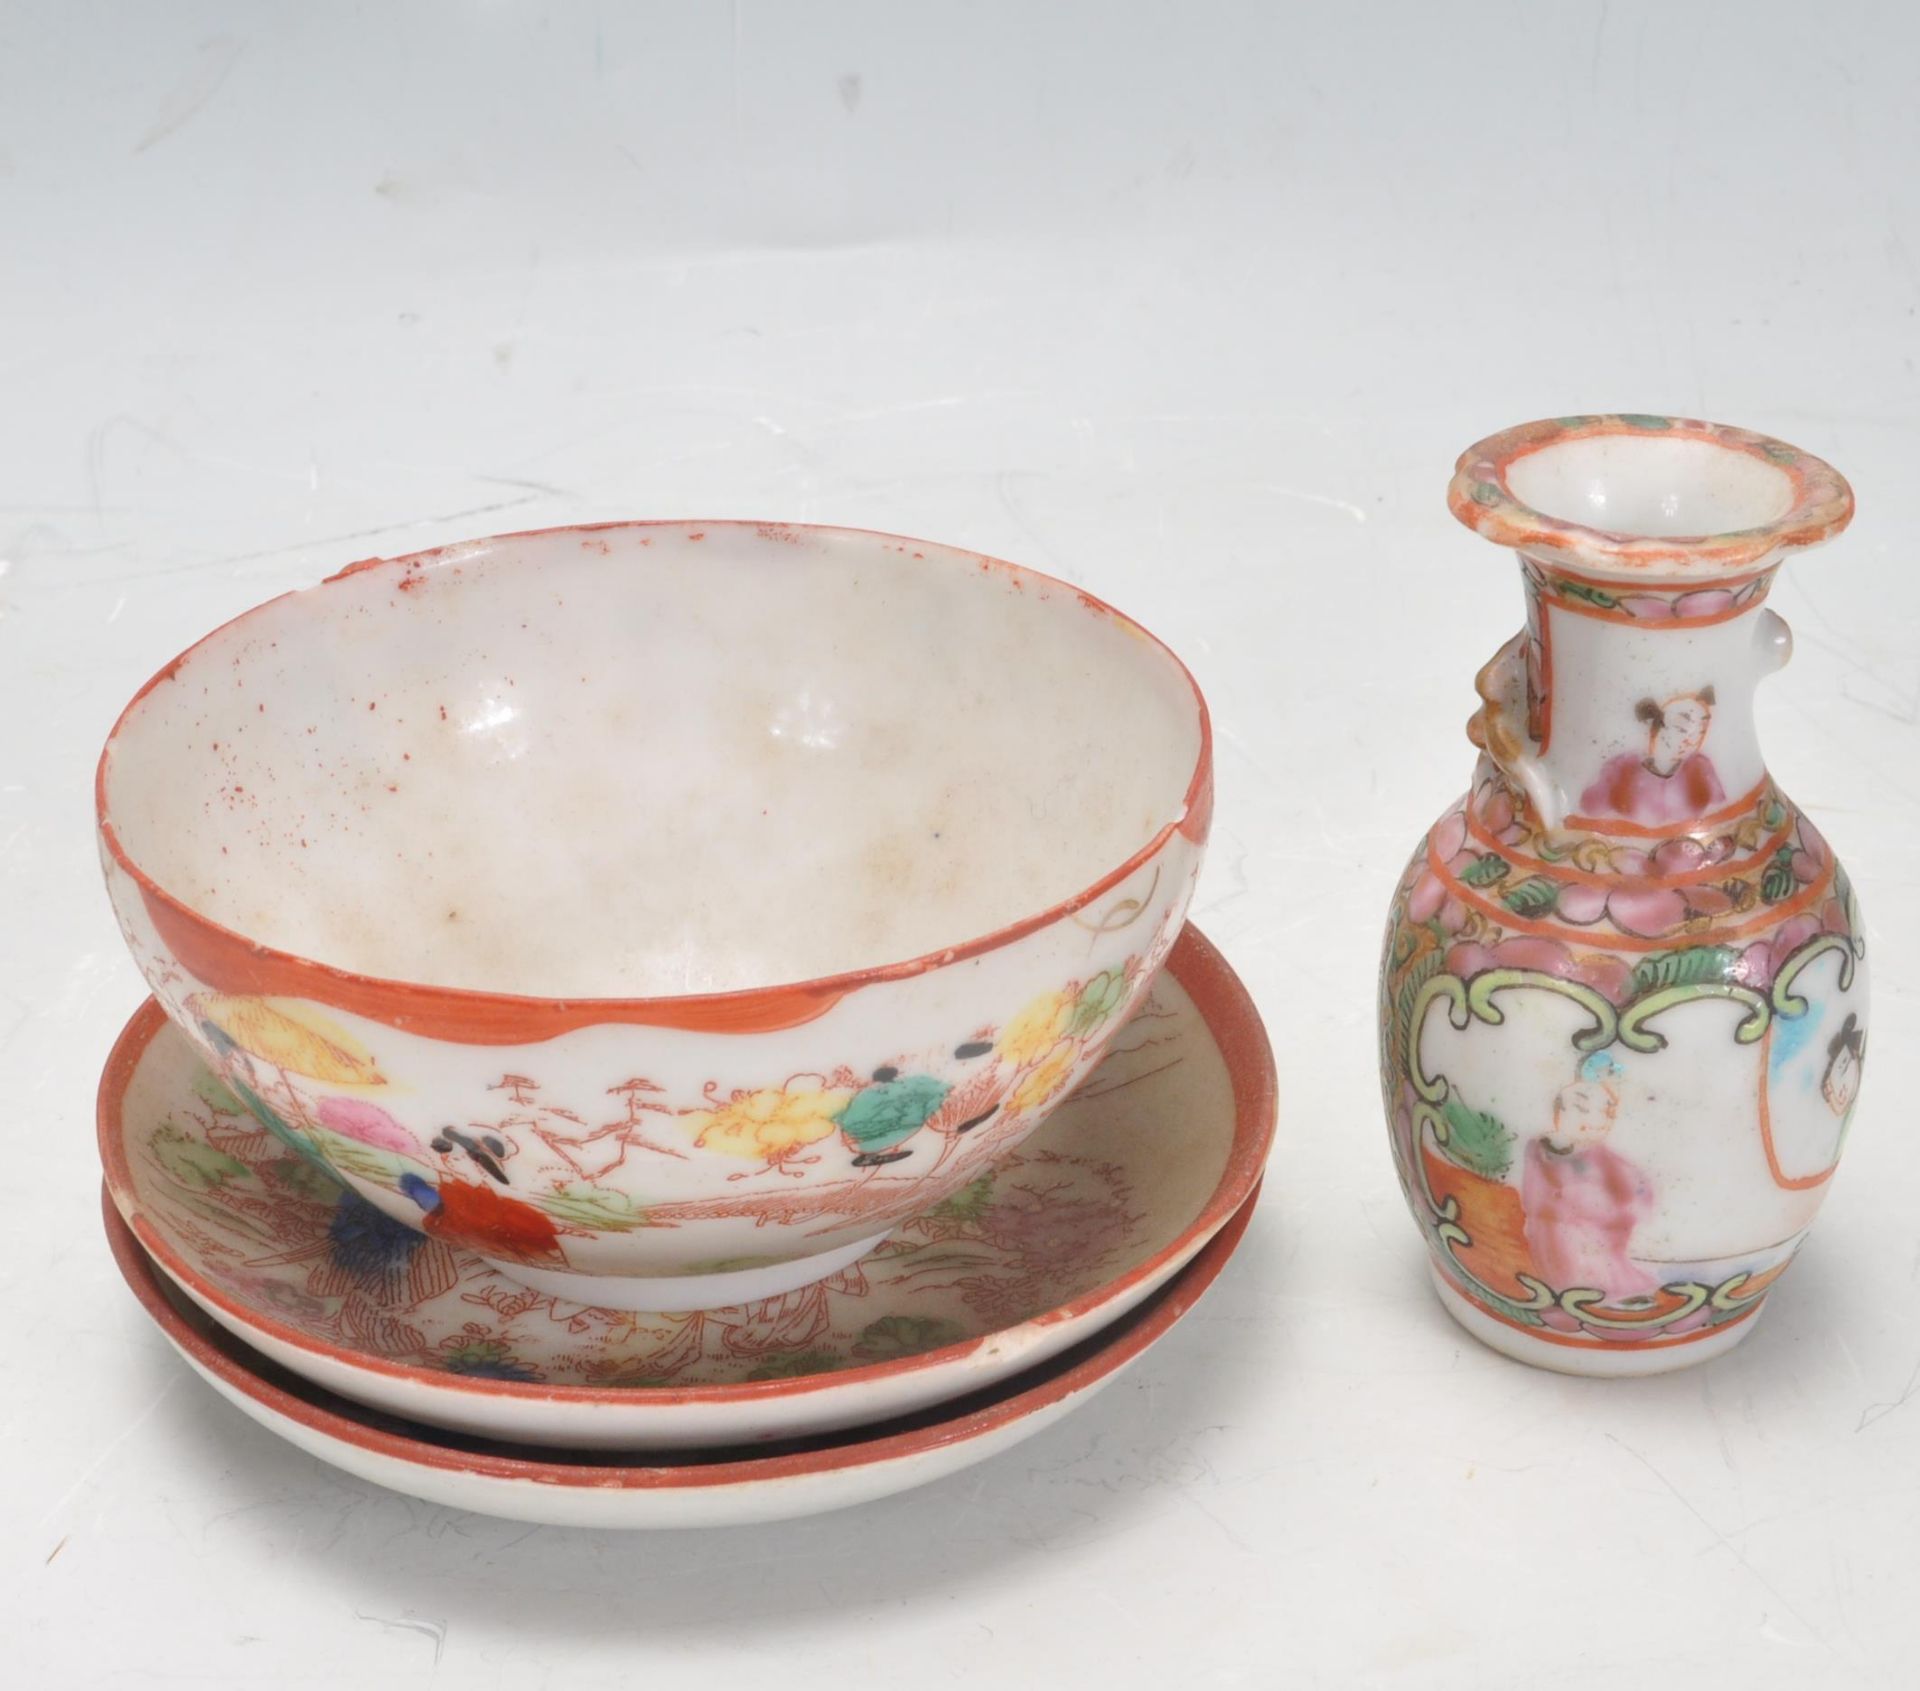 GROUP OF 19TH CENTURY ANTIQUE CHINESE ORIENTAL CERAMIC PORCELAIN WARE - Image 6 of 6